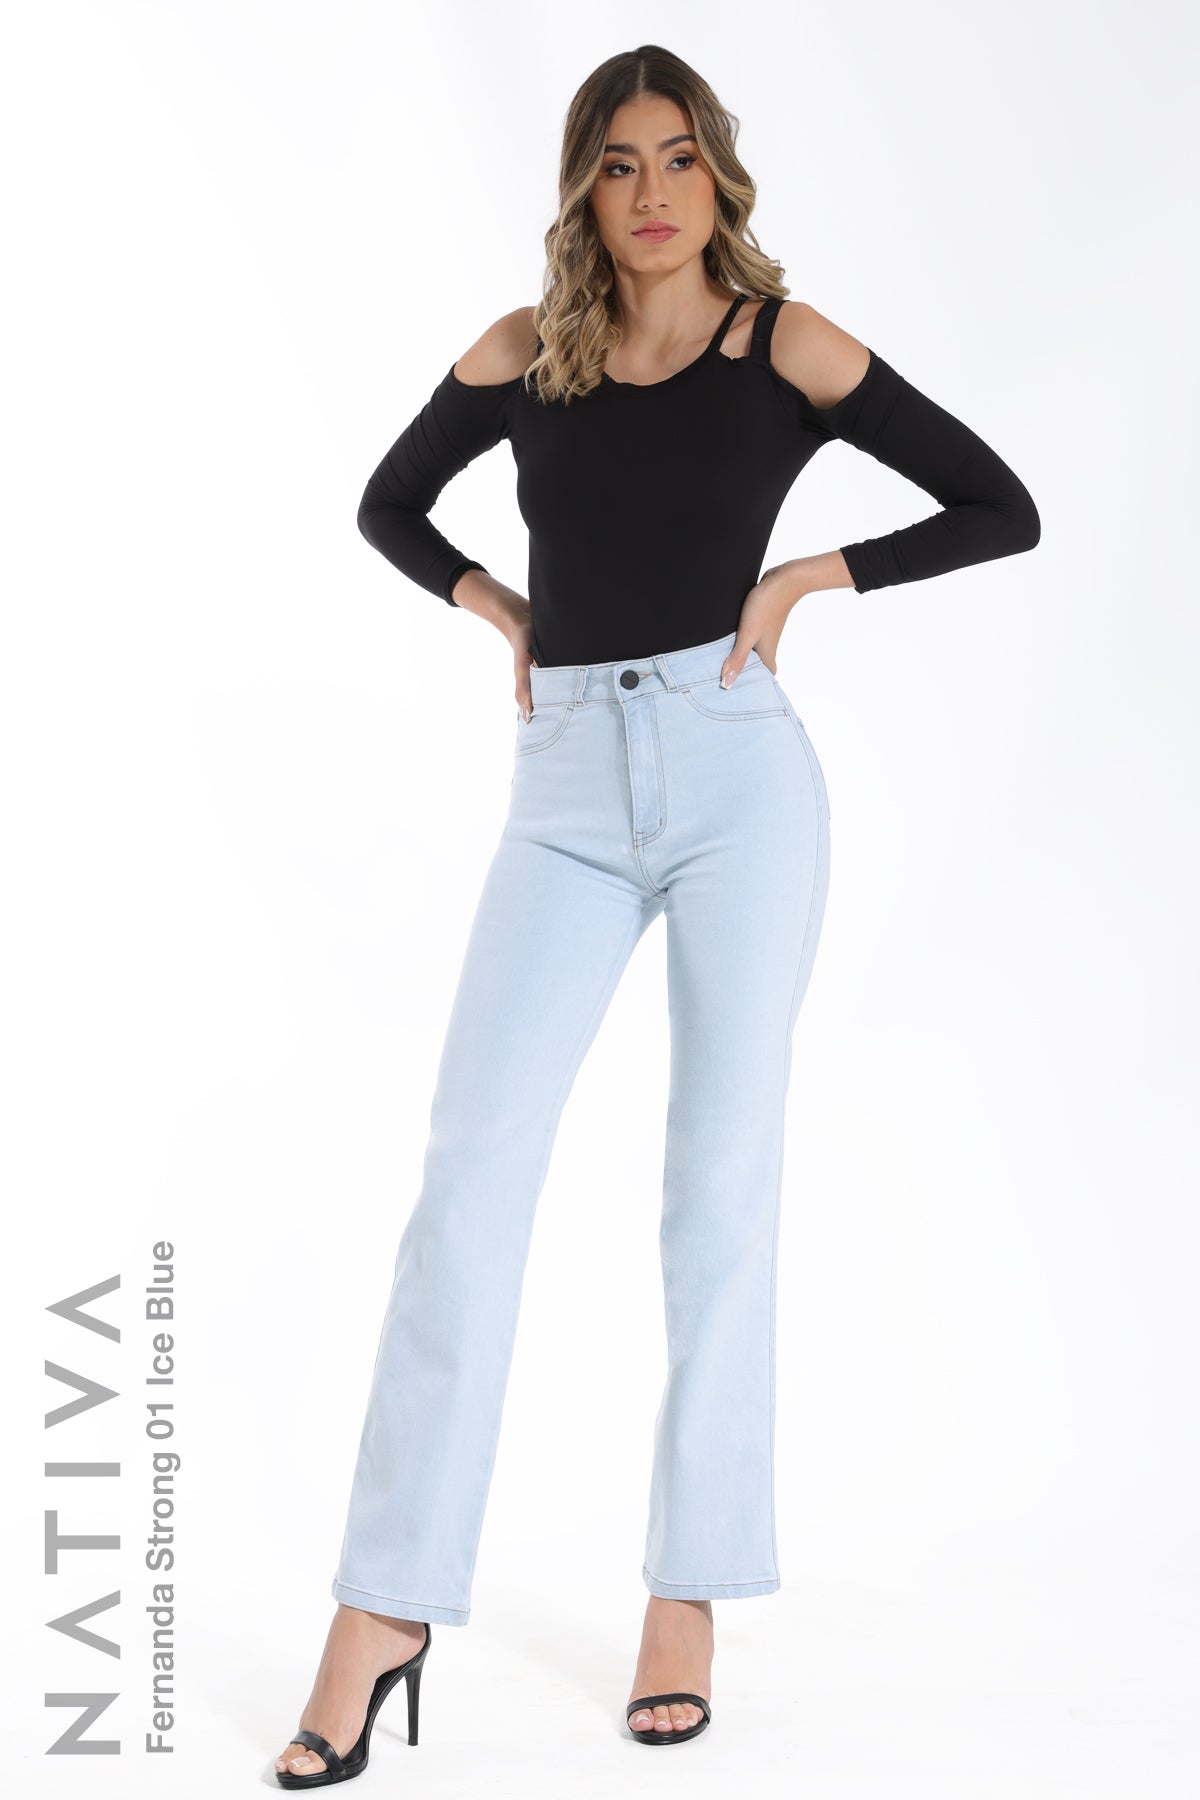 STRAIGHT JEANS, FERNANDA STRONG 01 ICE BLUE. Talle Alto. Con tejidos ESFD (Extreme Stretch Flattering Denim). Cintura Ajustable PERFECT FIT®